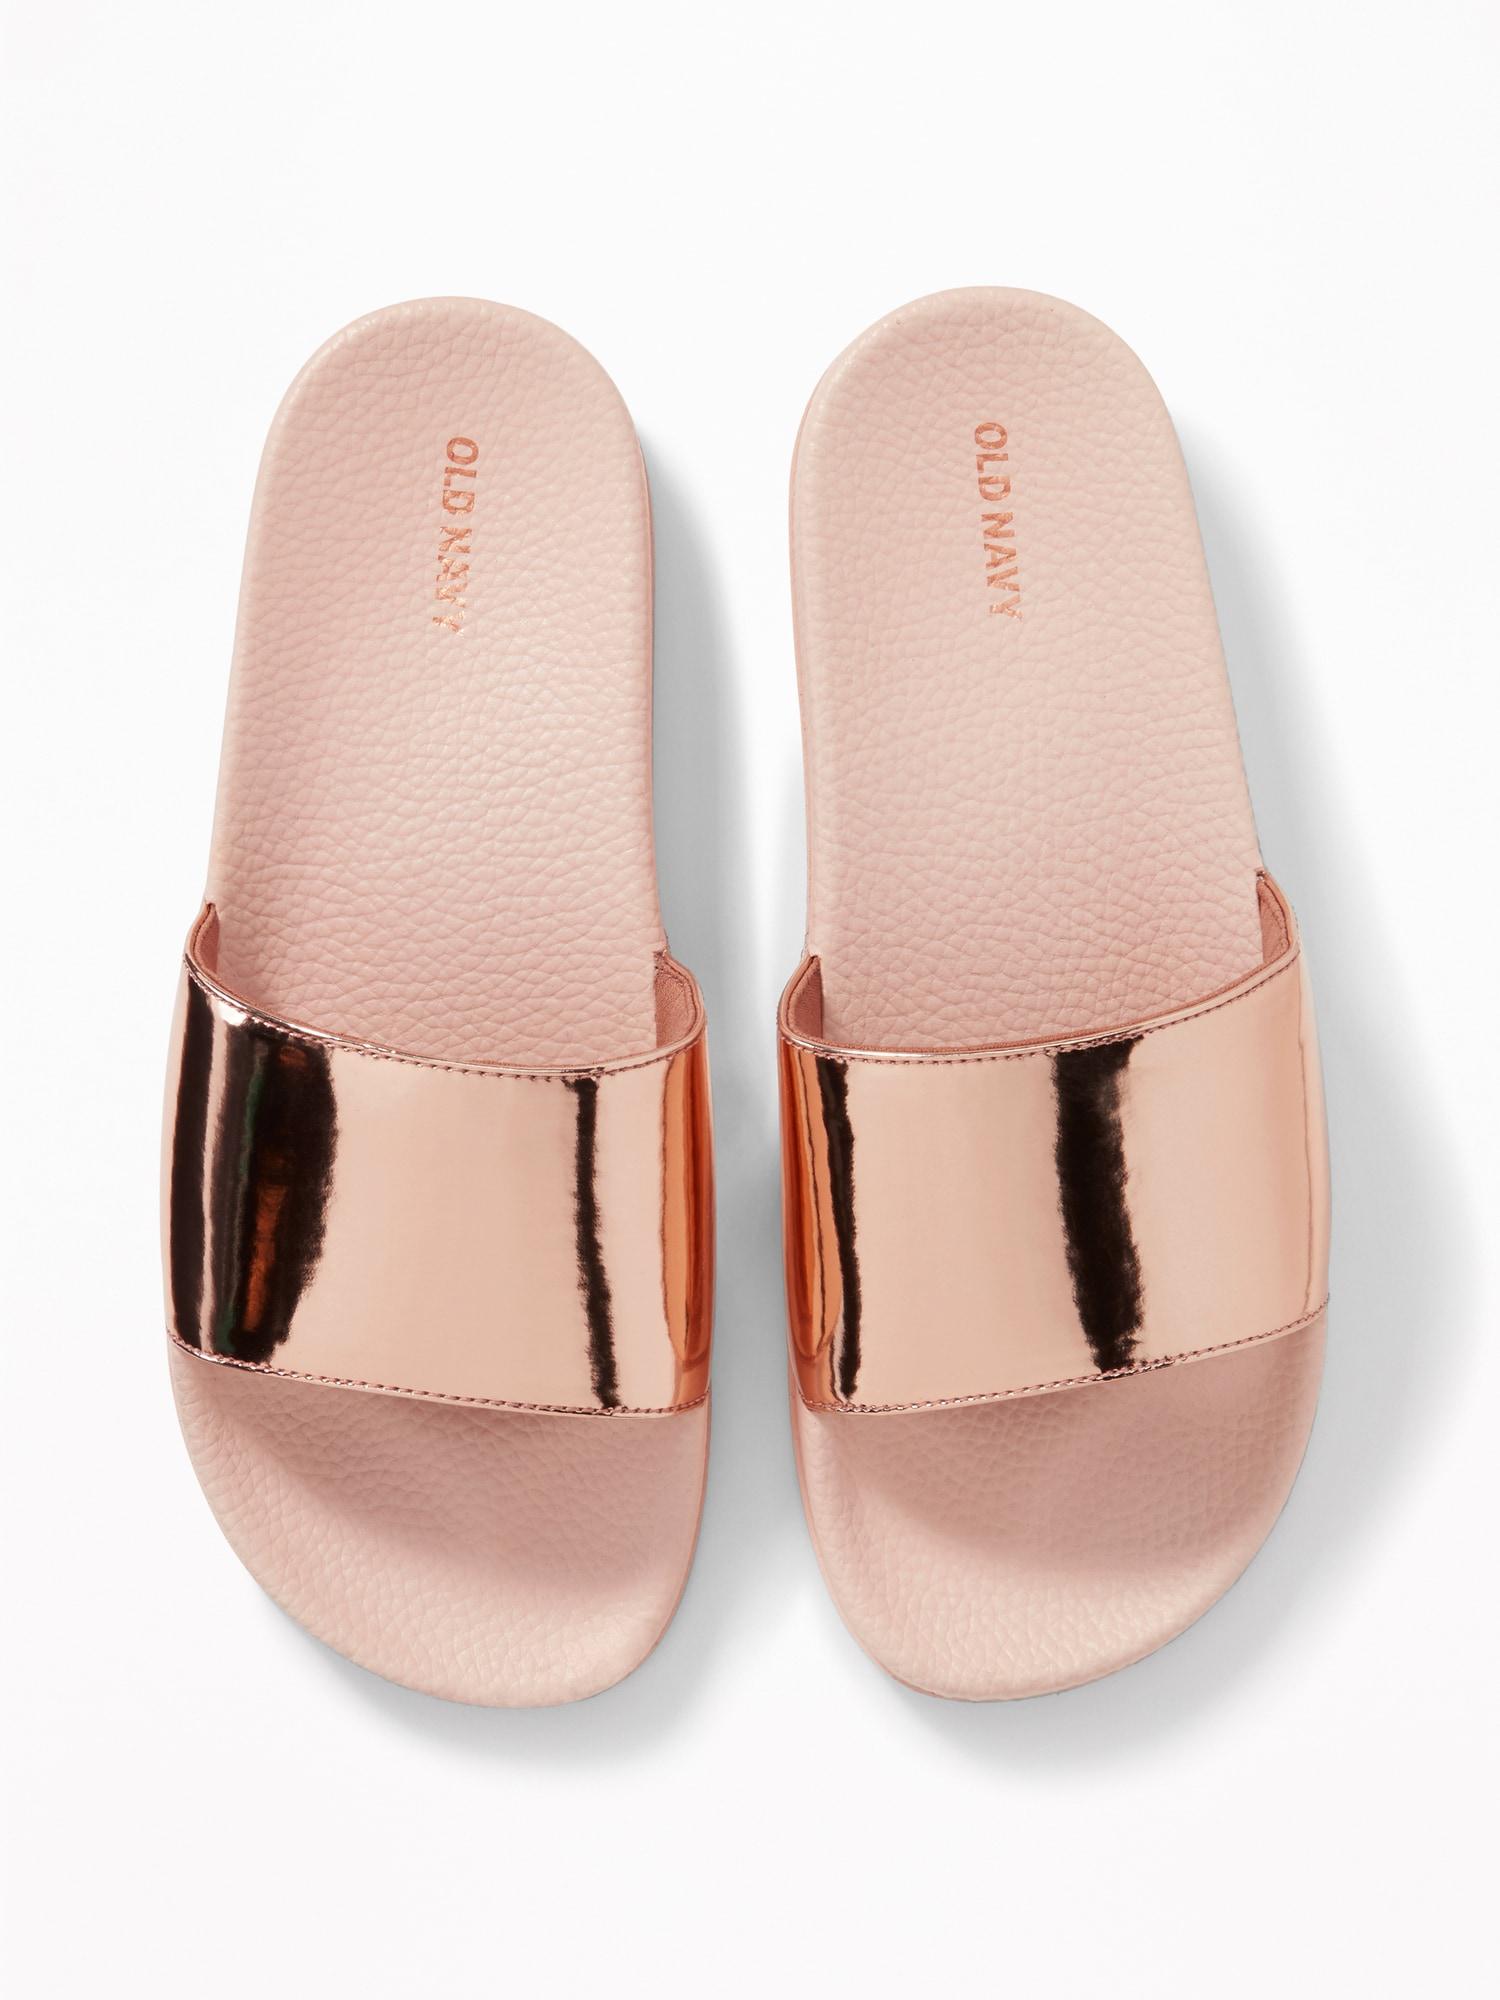 old navy gold sandals